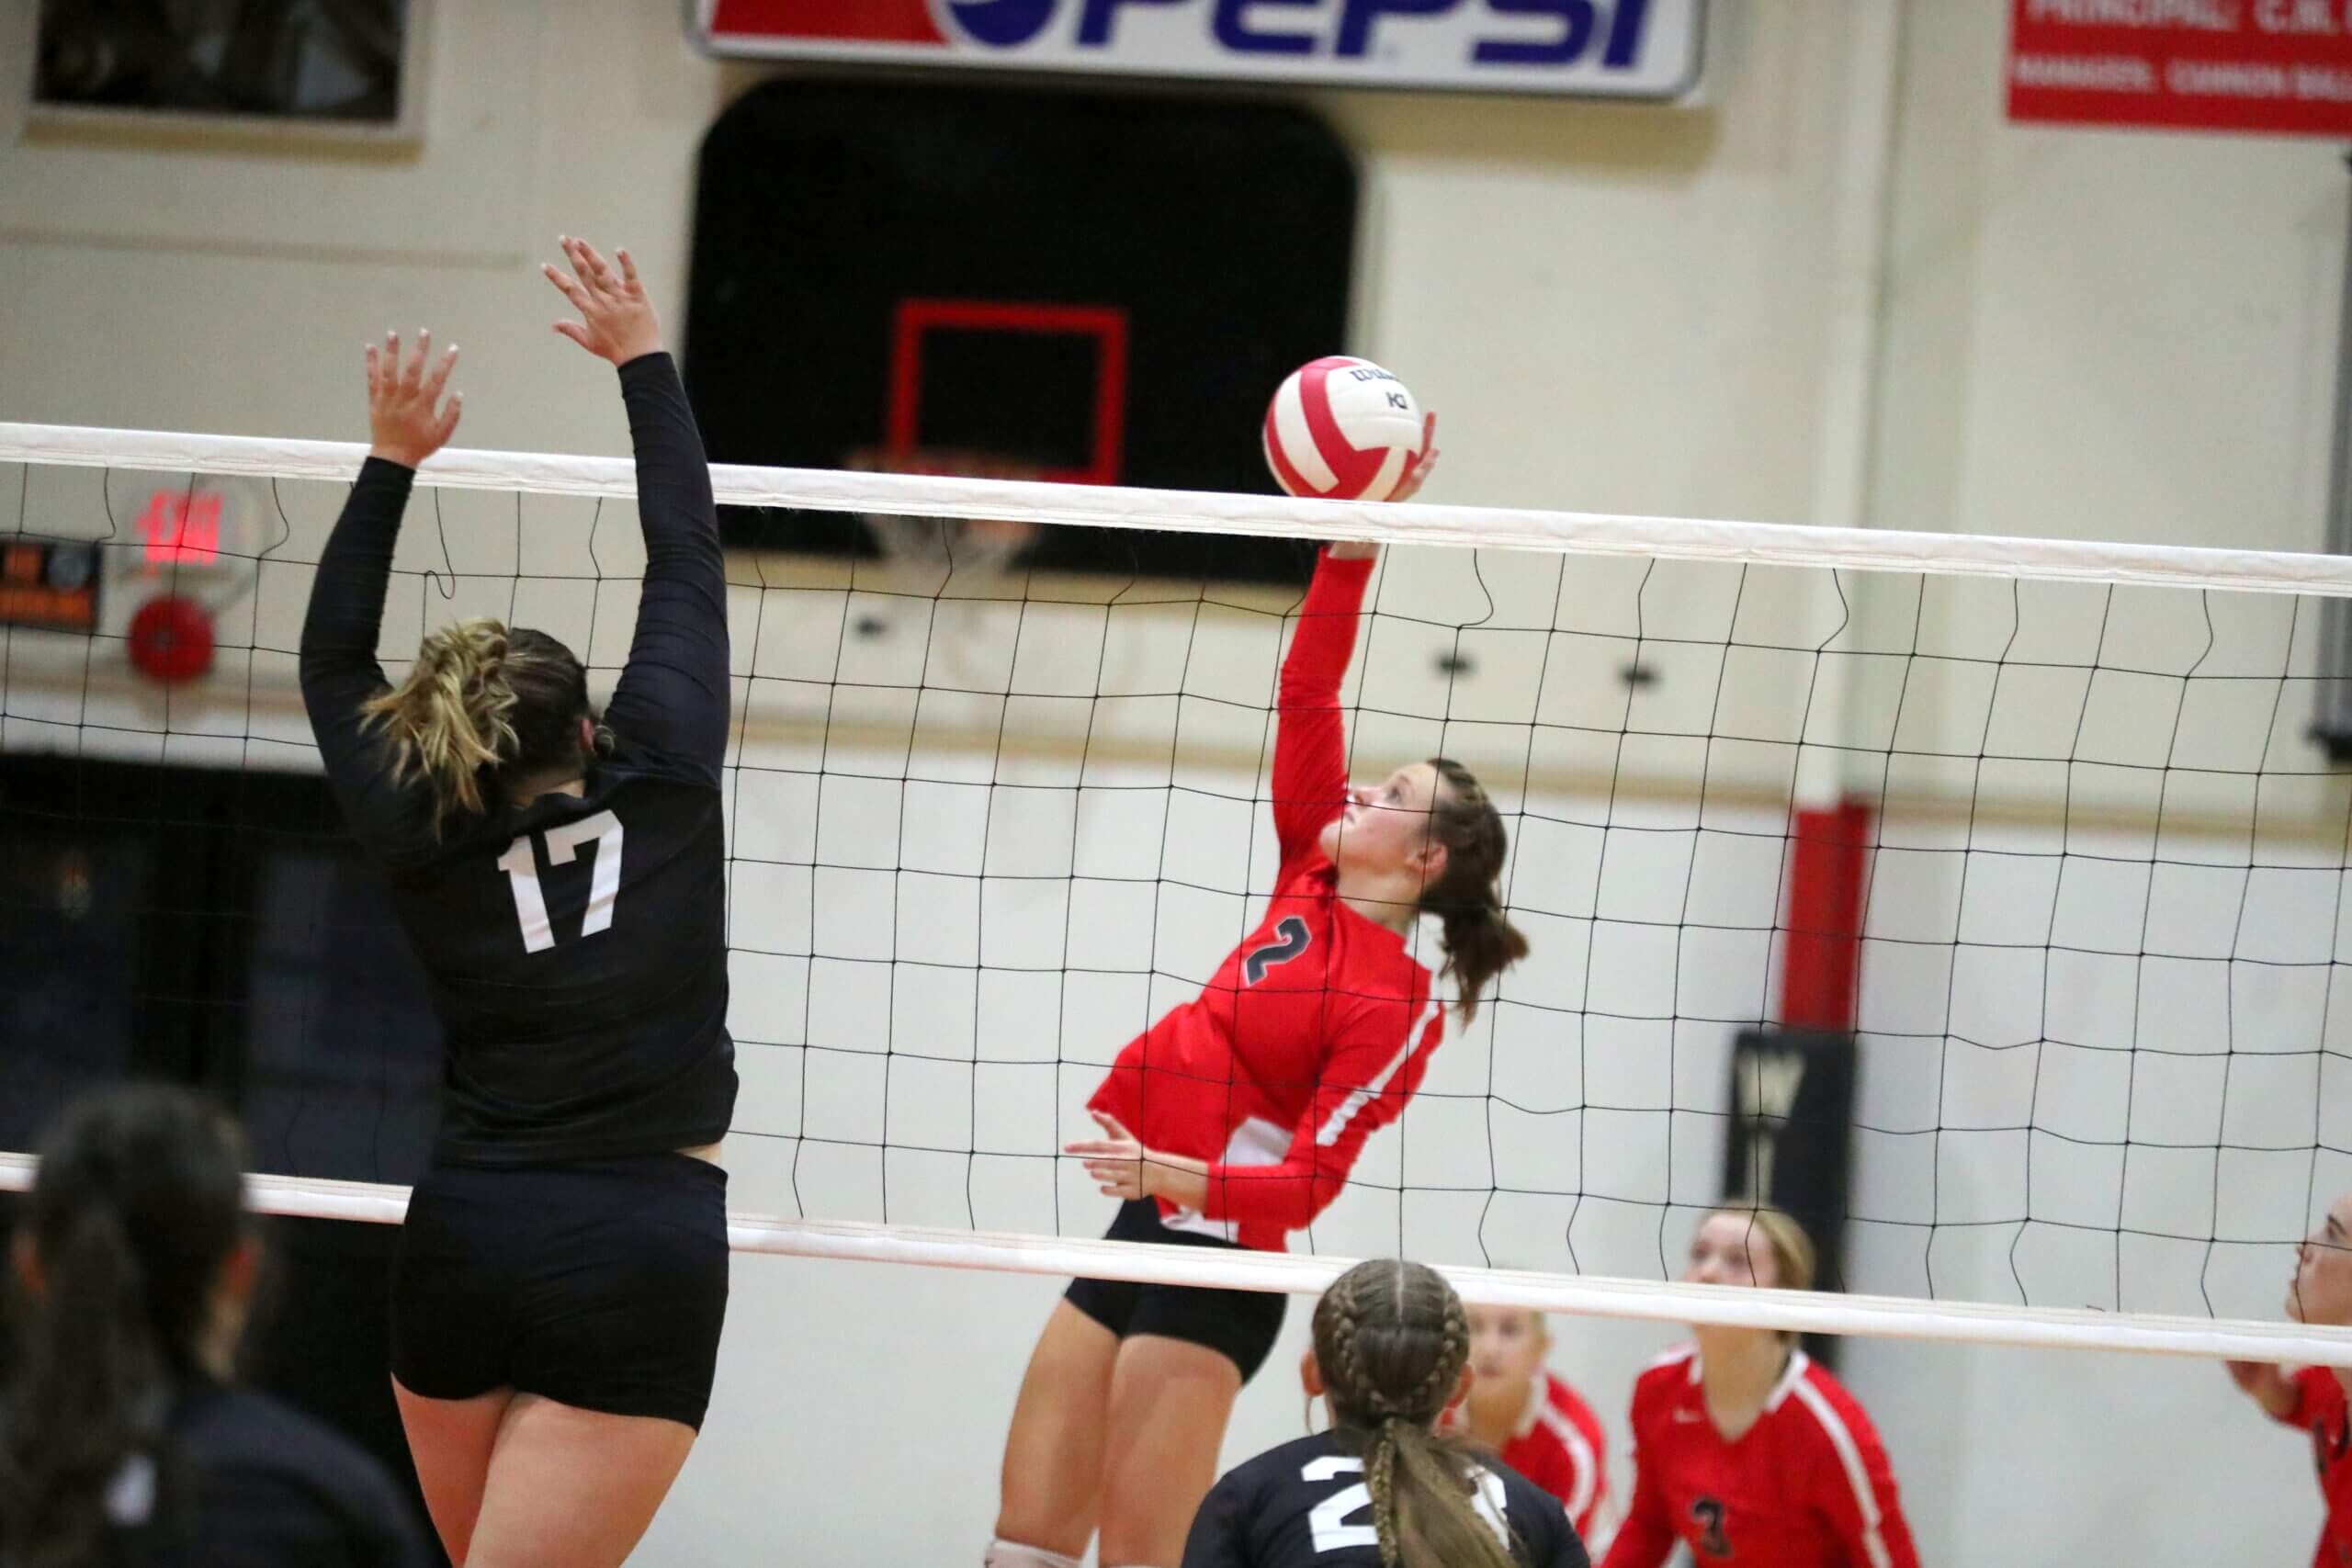 Tippah county sweeps through major awards in 1-2A volleyball